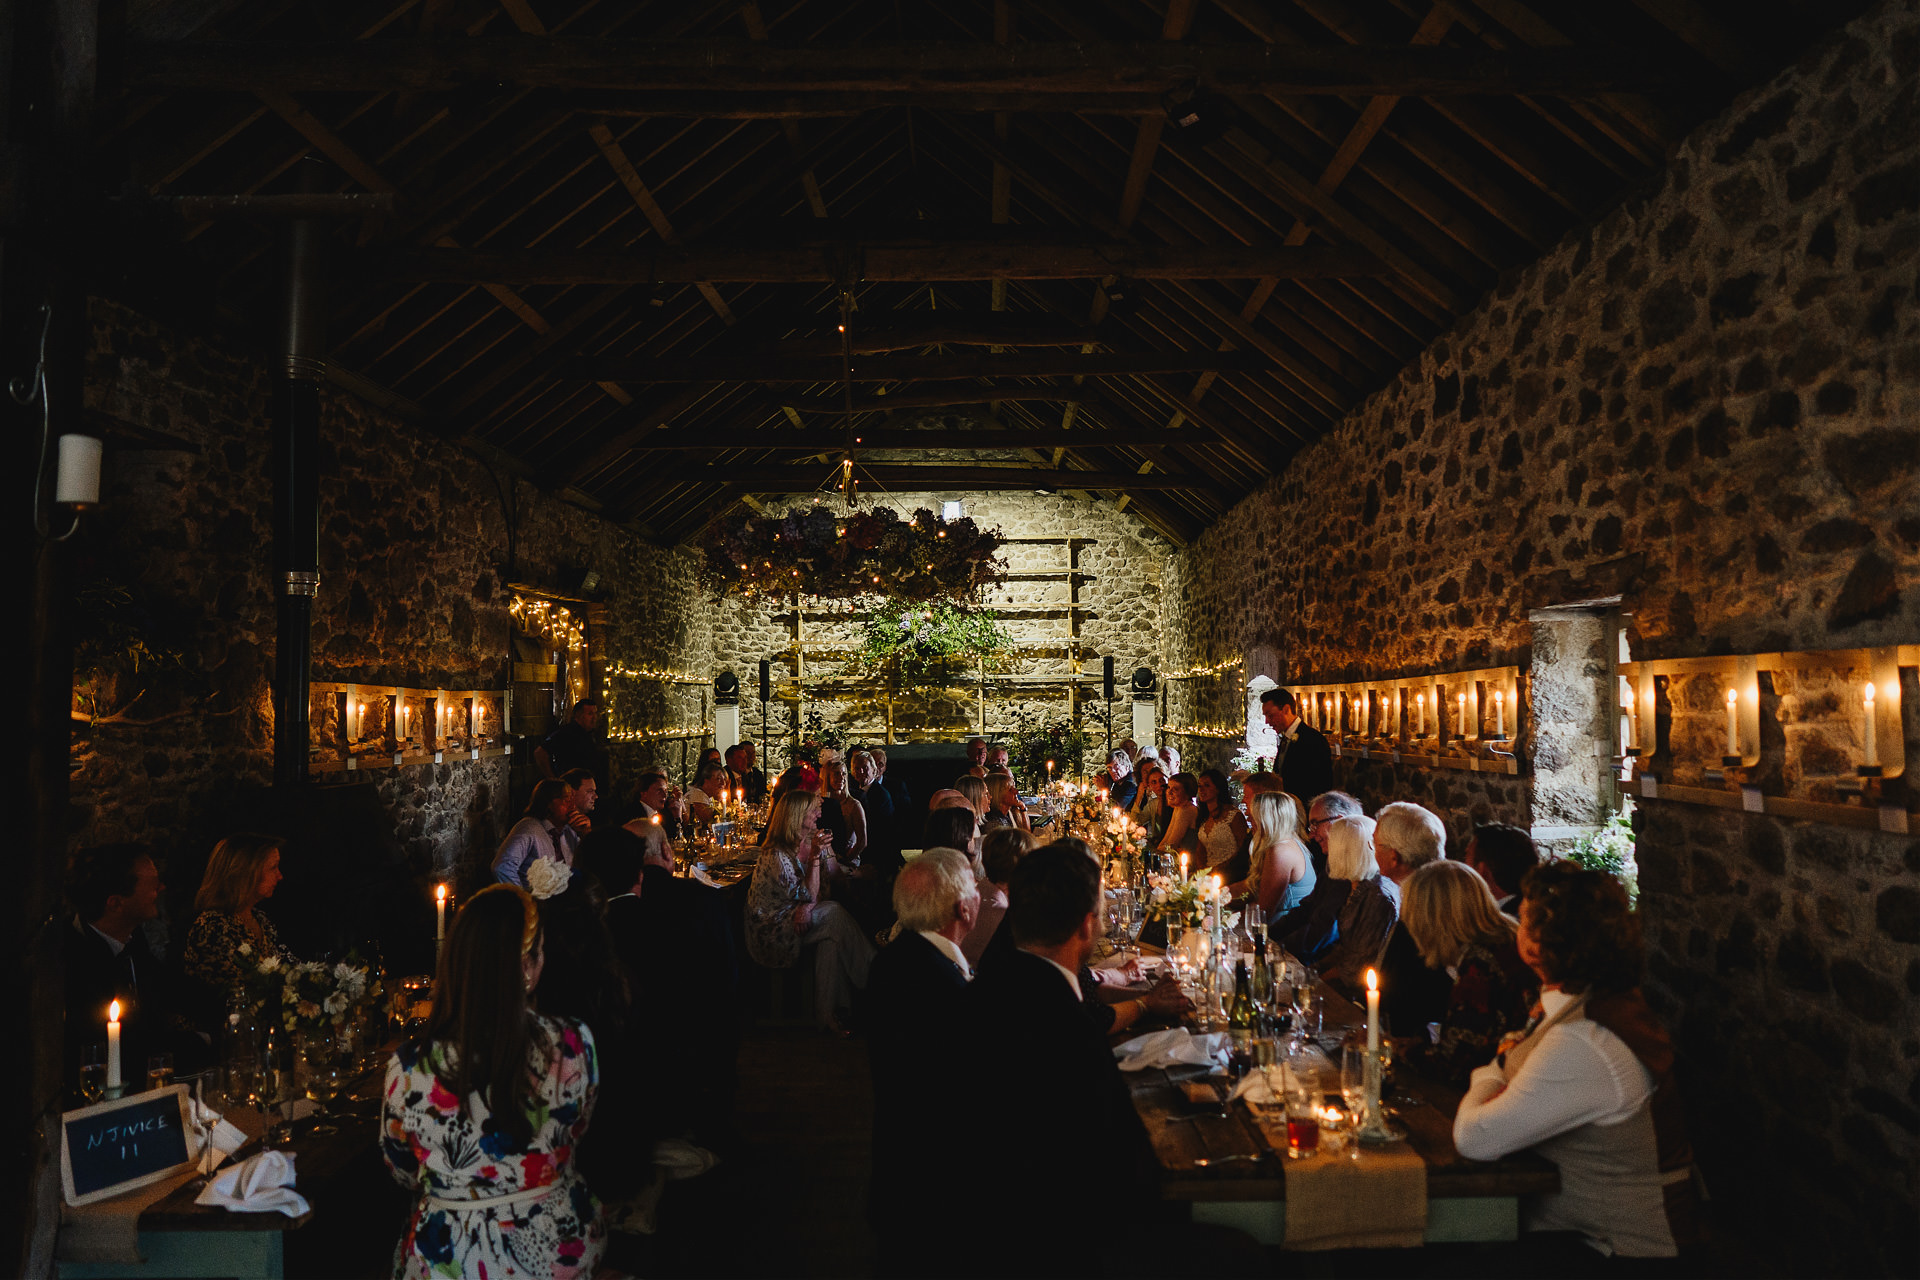 Wedding guests seated along long tables in an incredibly atmospheric wow factor wedding barn, with candles around the walls and a dark ambience